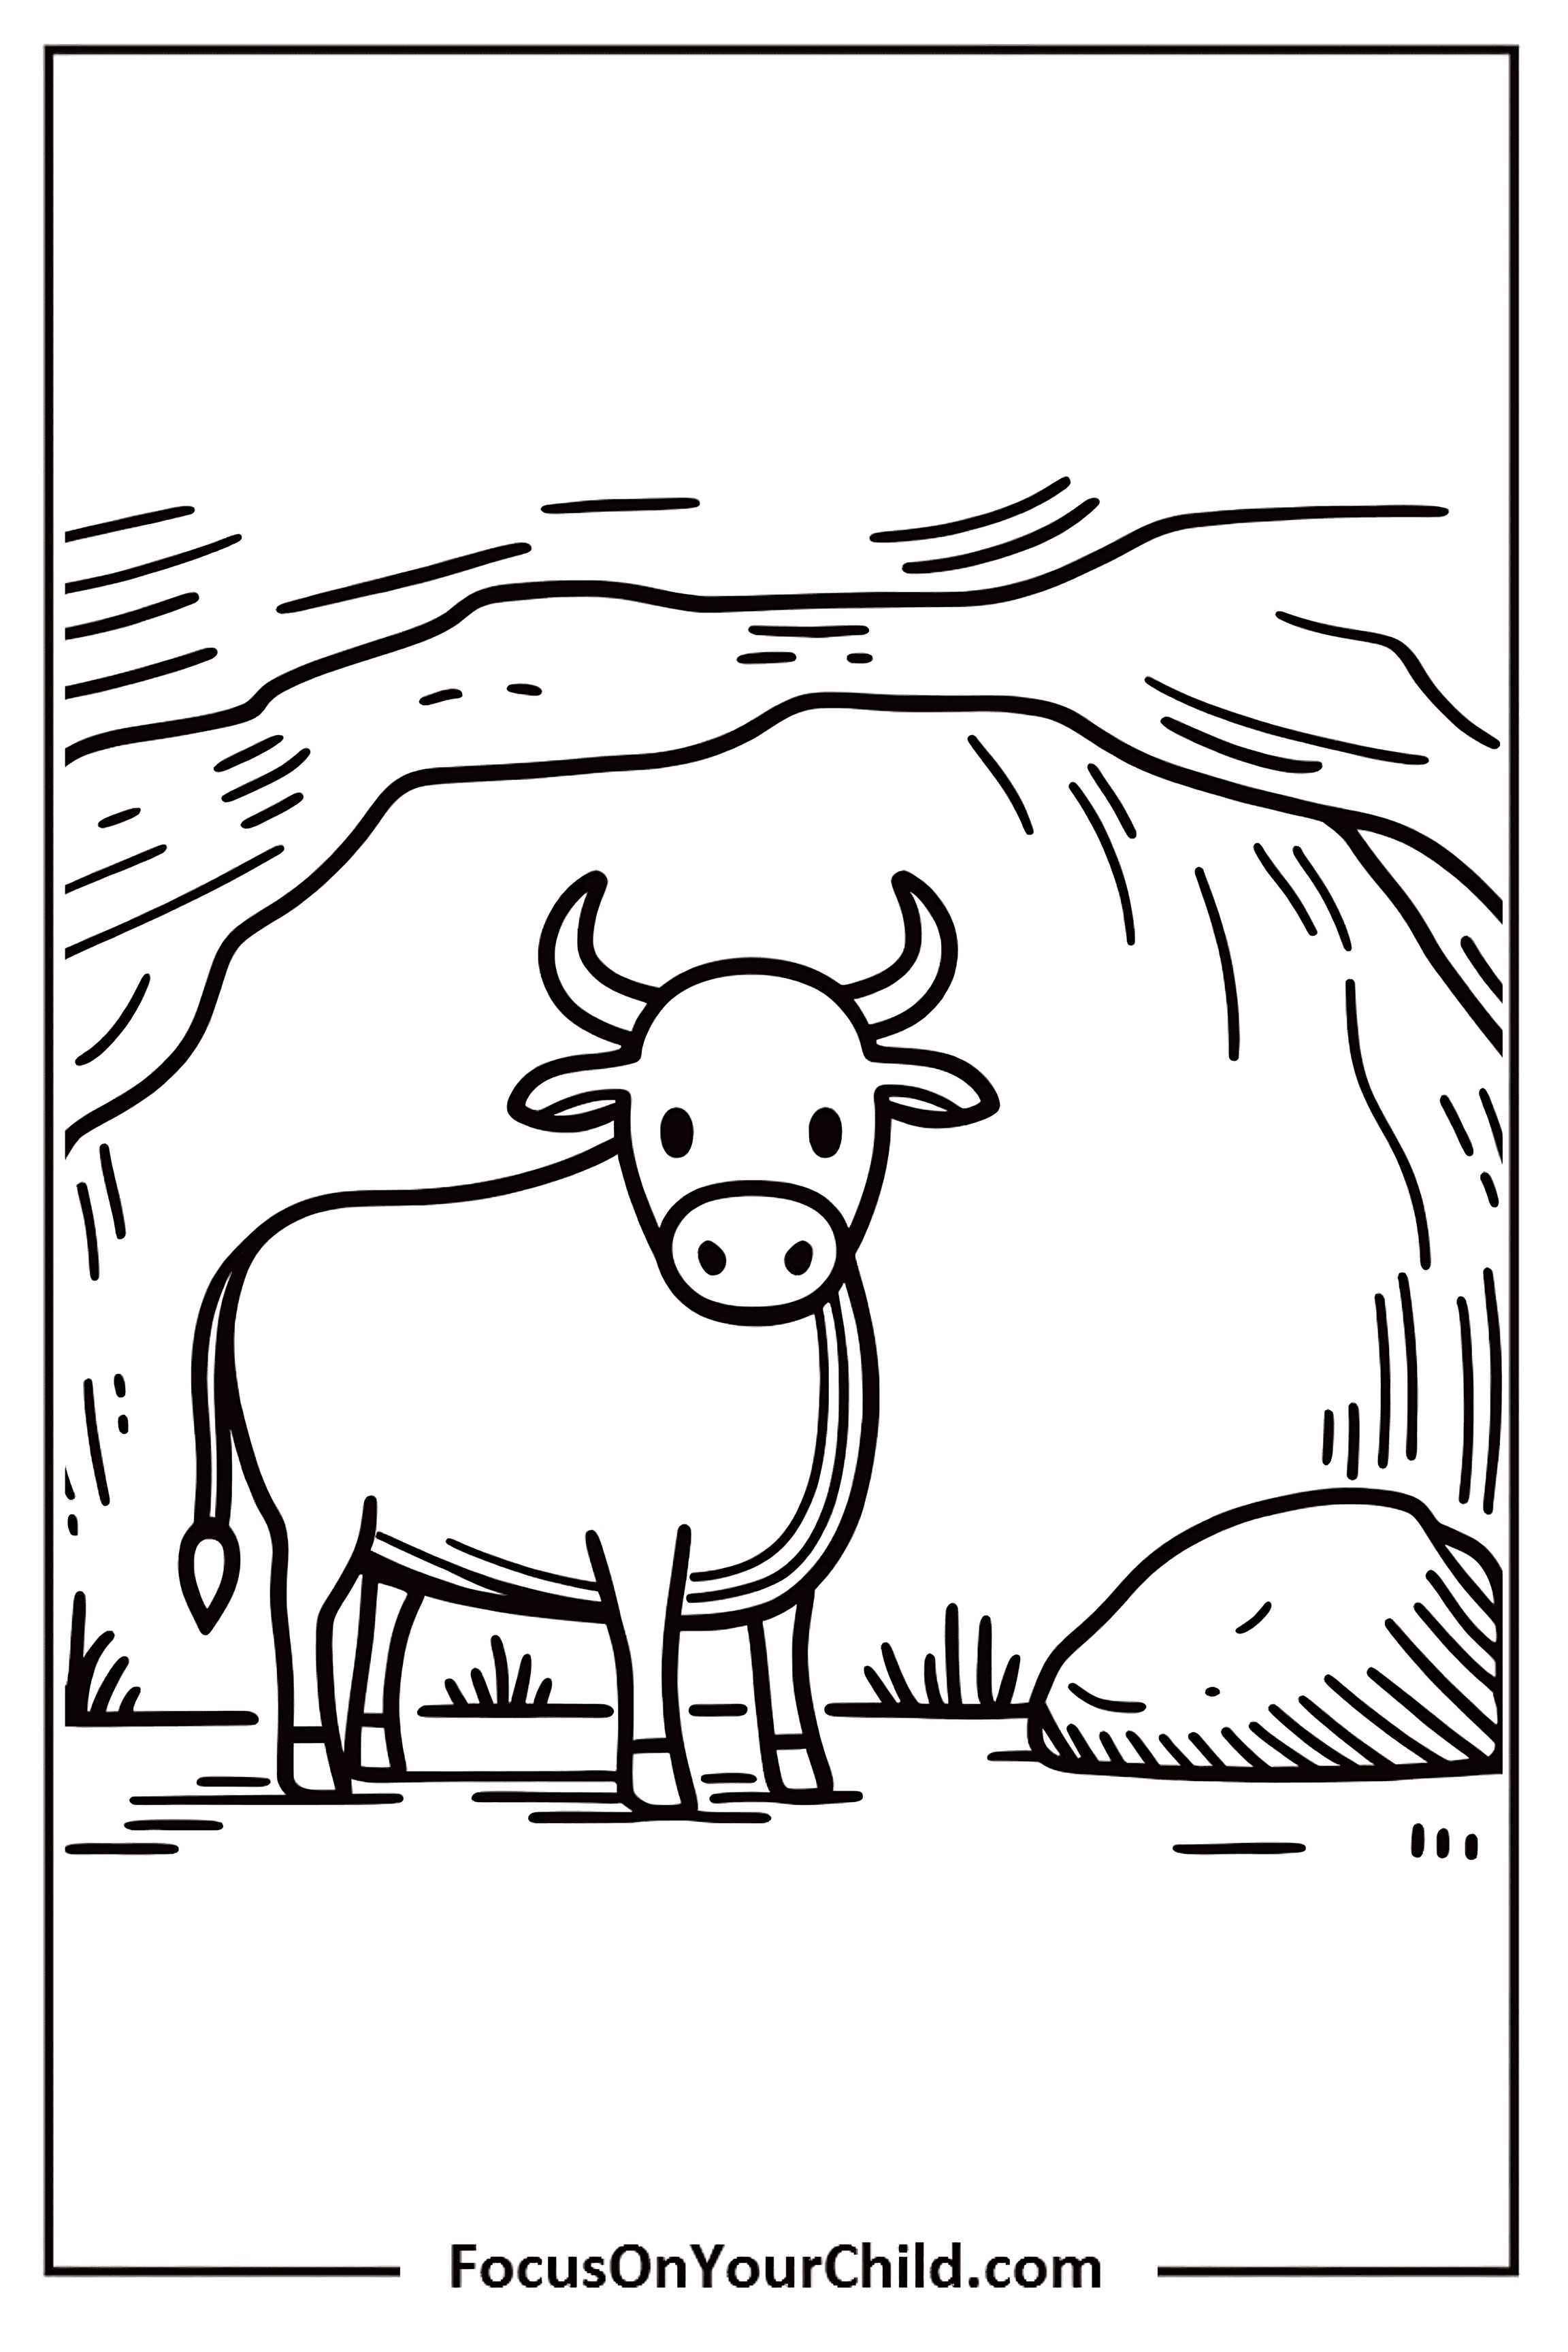 Cow standing in rocky cave, educational childrens illustration.